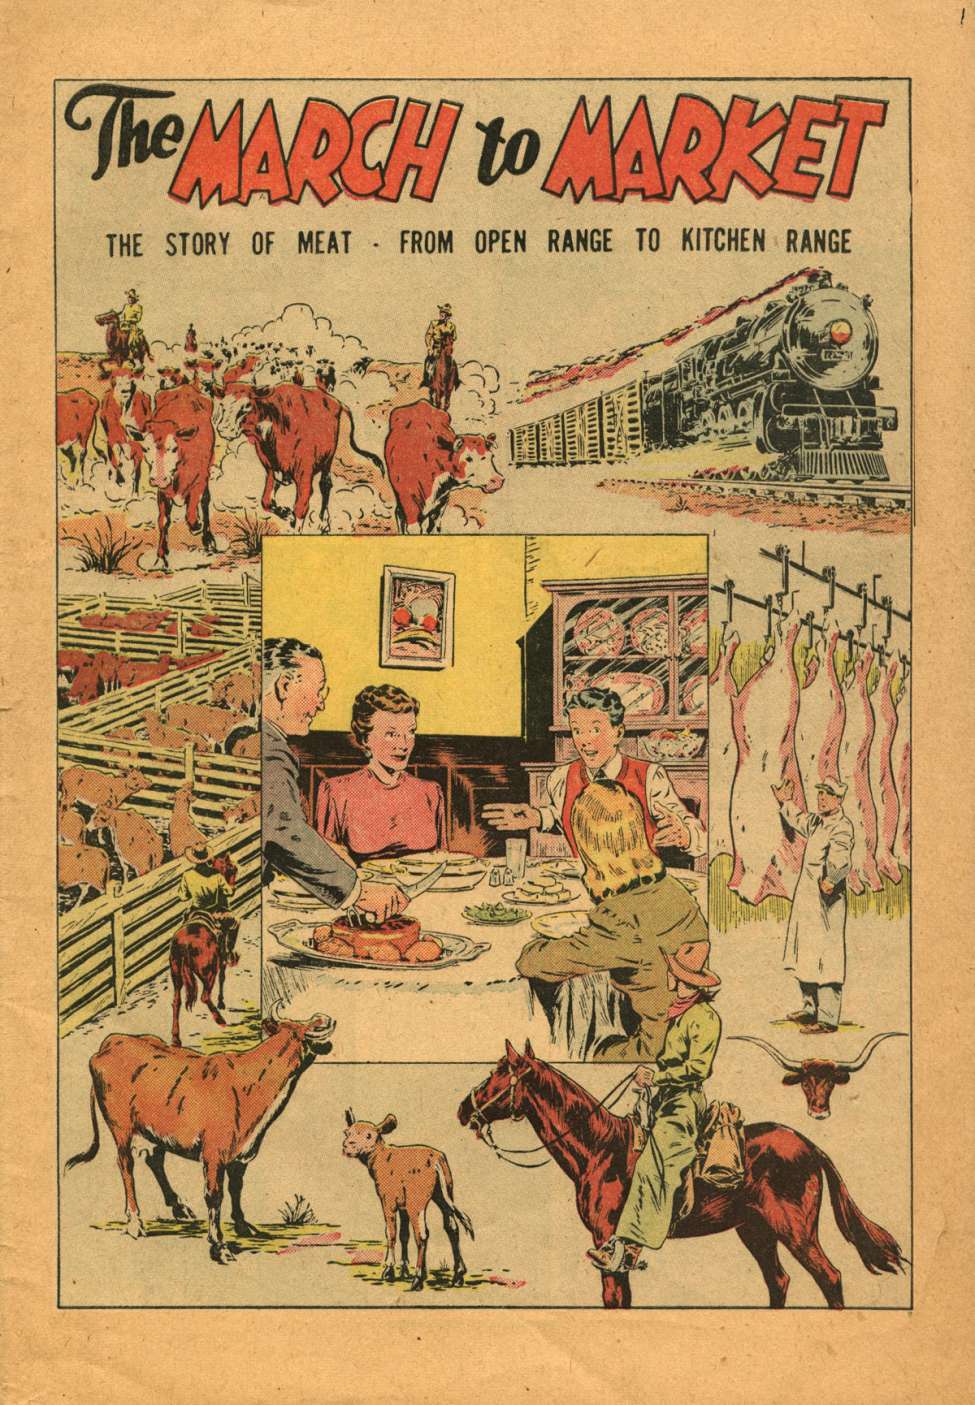 Comic Book Cover For March to Market - The Story of Meat